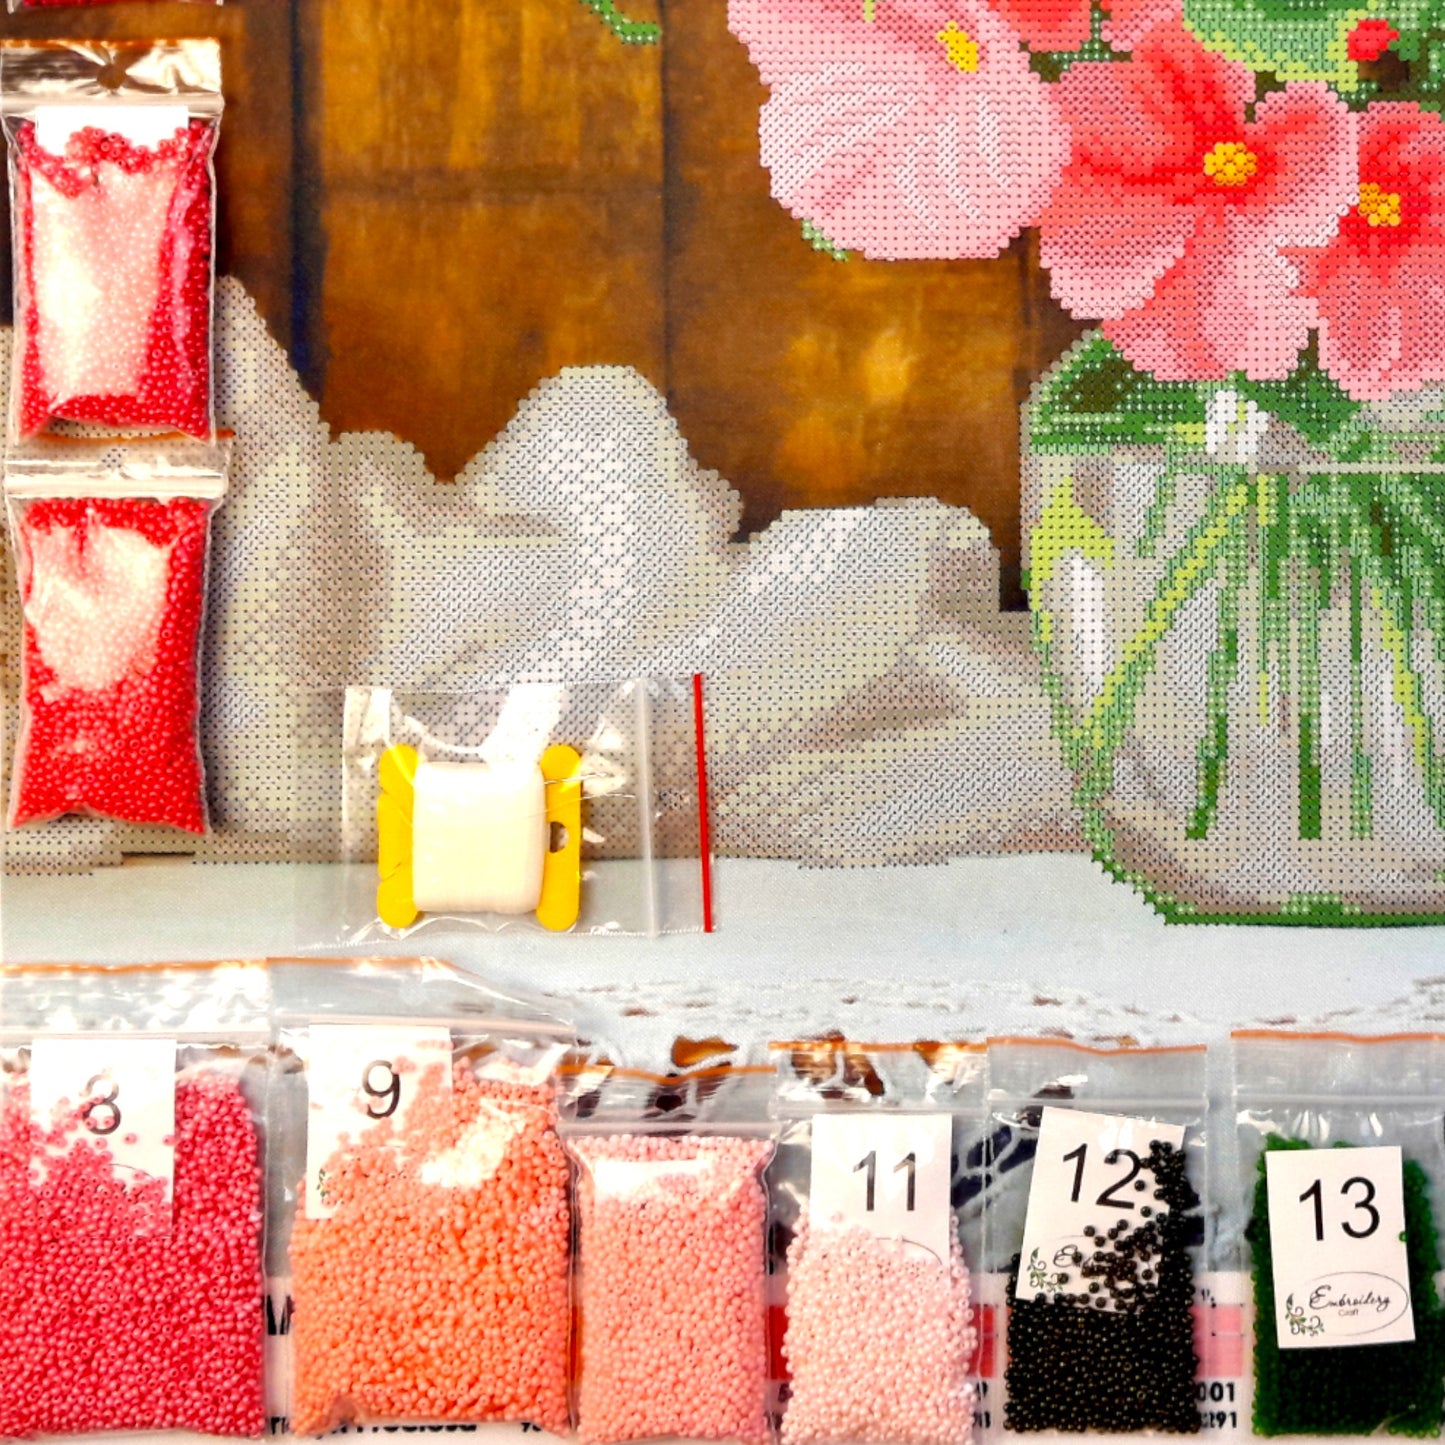 DIY Bead embroidery kit "Mallow flowers''. Size: 21 - 21 in (53 - 53cm) - VadymShop